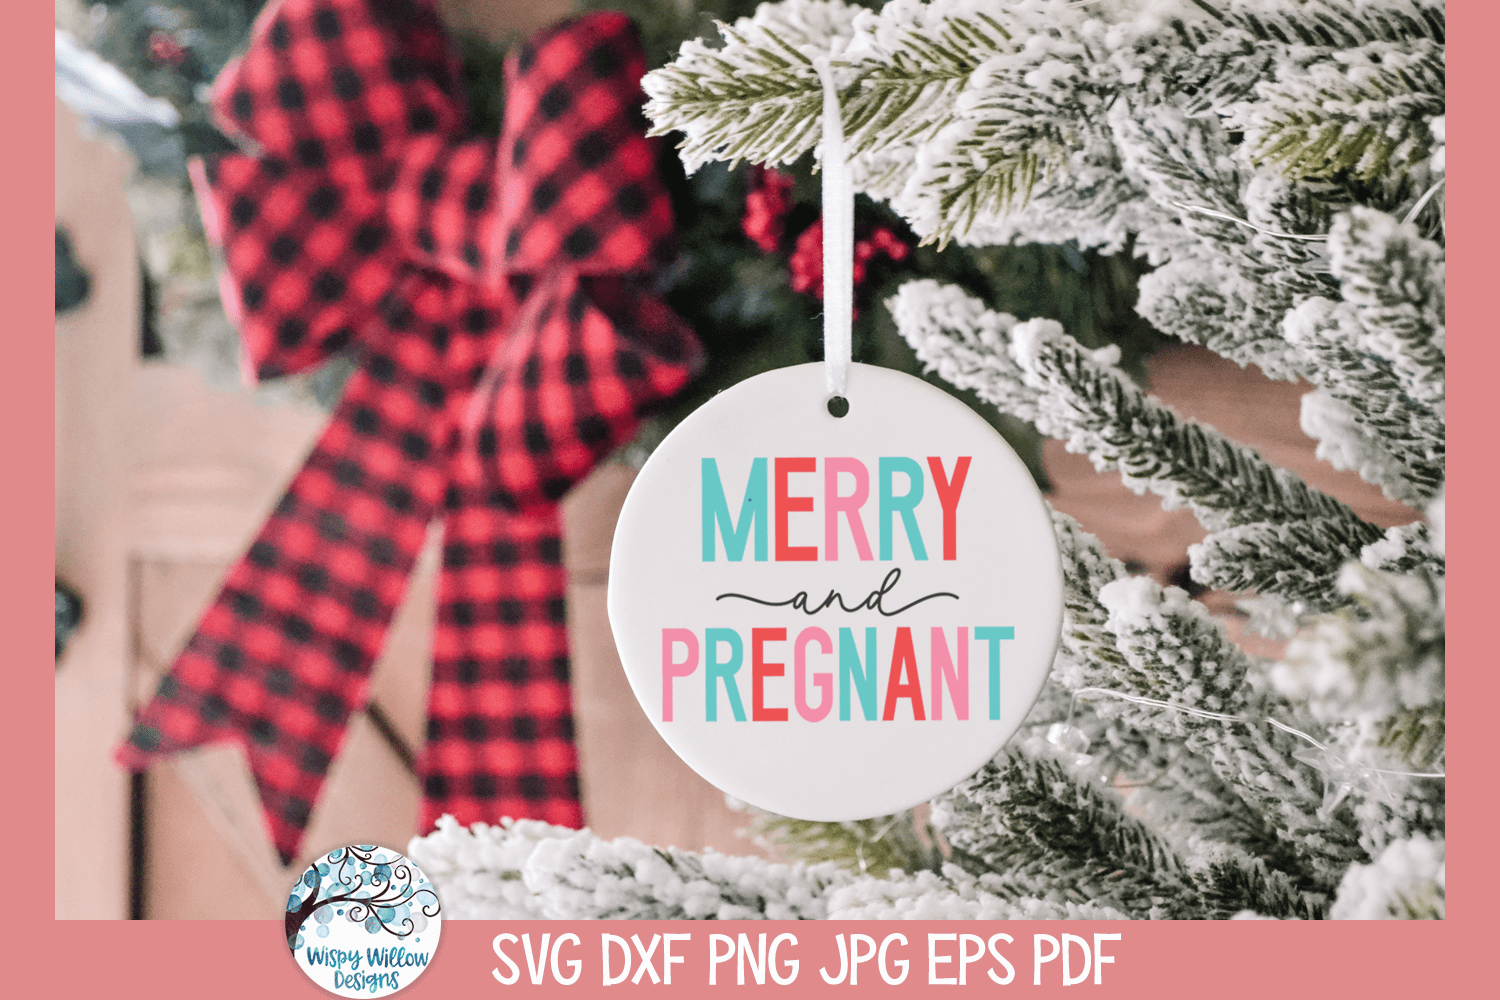 Merry And Pregnant SVG | Christmas Pregnancy Announcement Wispy Willow Designs Company